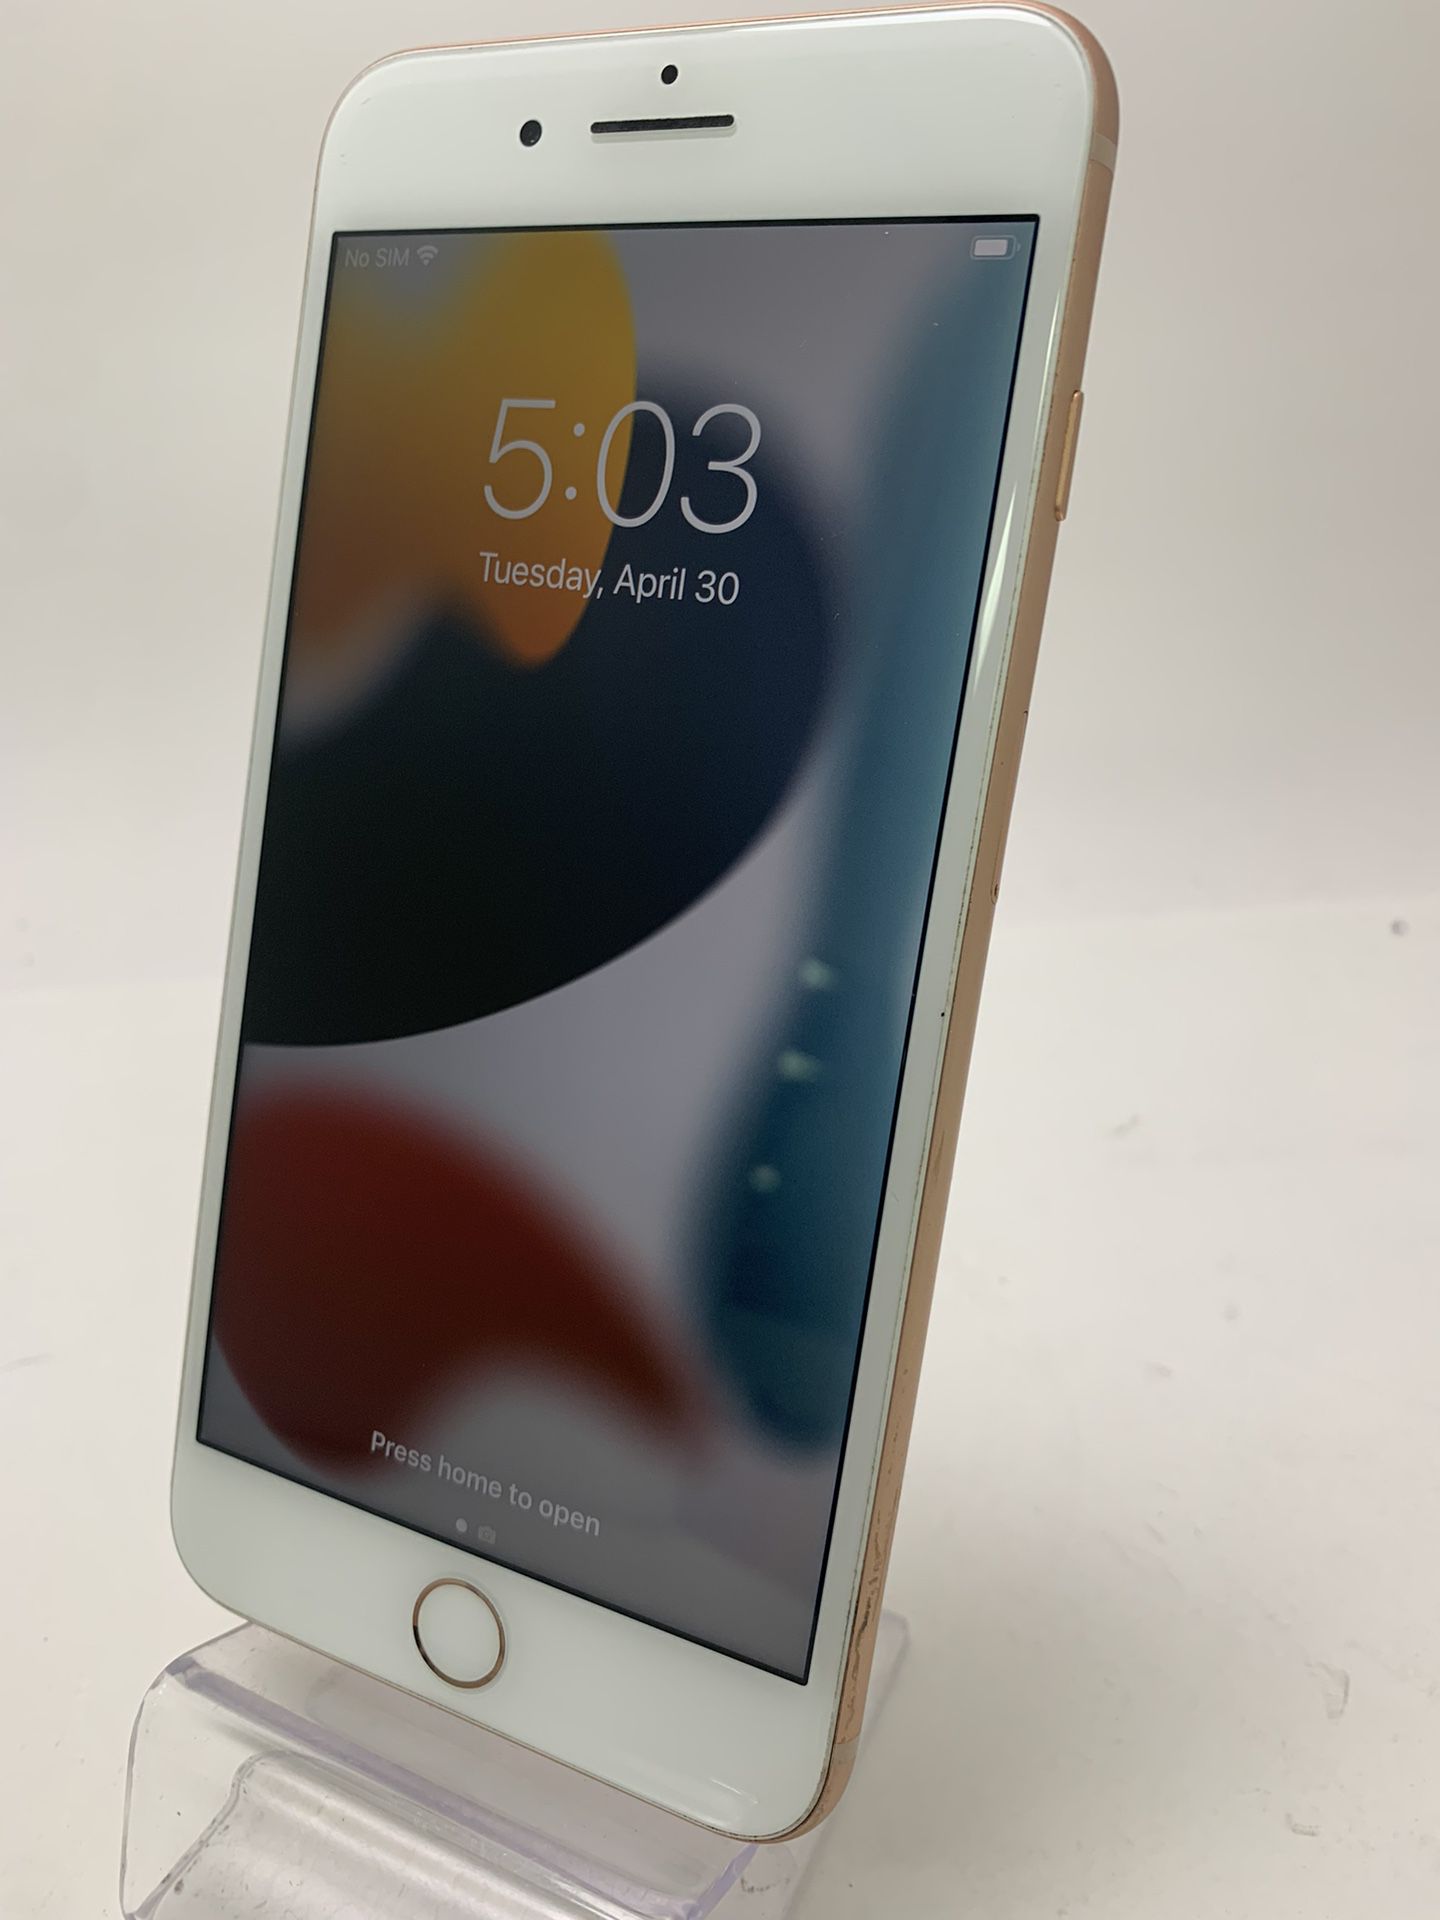 Apple iPhone 8 Plus Gold 128GB Verizon Only With 30 Day Warranty